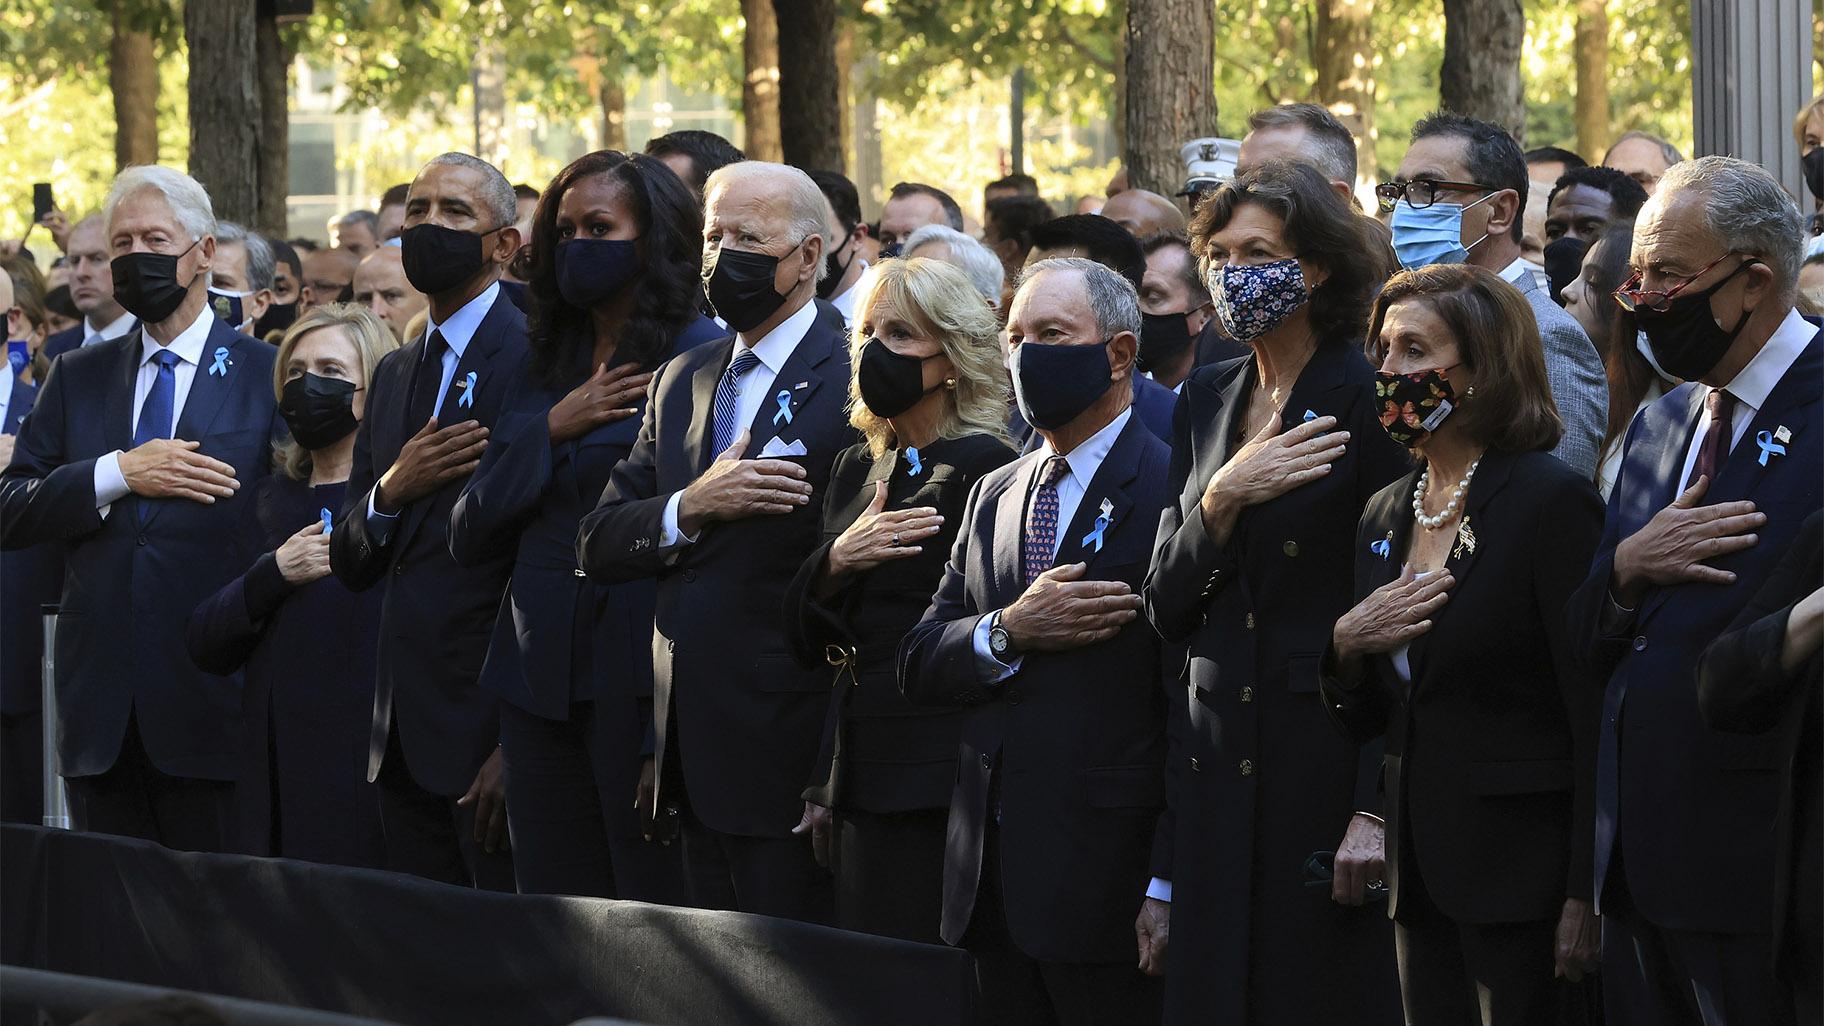 (L-R)  former President Bill Clinton, former First Lady Hillary Clinton, former President Barack Obama, former First Lady Michelle Obama, President Joe Biden, First Lady Jill Biden, former New York City Mayor Michael Bloomberg, Bloomberg's partner Diana Taylor, Speaker of the House Nancy Pelosi and Senate Minority Leader Charles Schumer stand for the national anthem during the annual 9/11 Commemoration Ceremony at the National 9/11 Memorial and Museum Sept. 11, 2021 in New York. (Chip Somodevilla / AP)